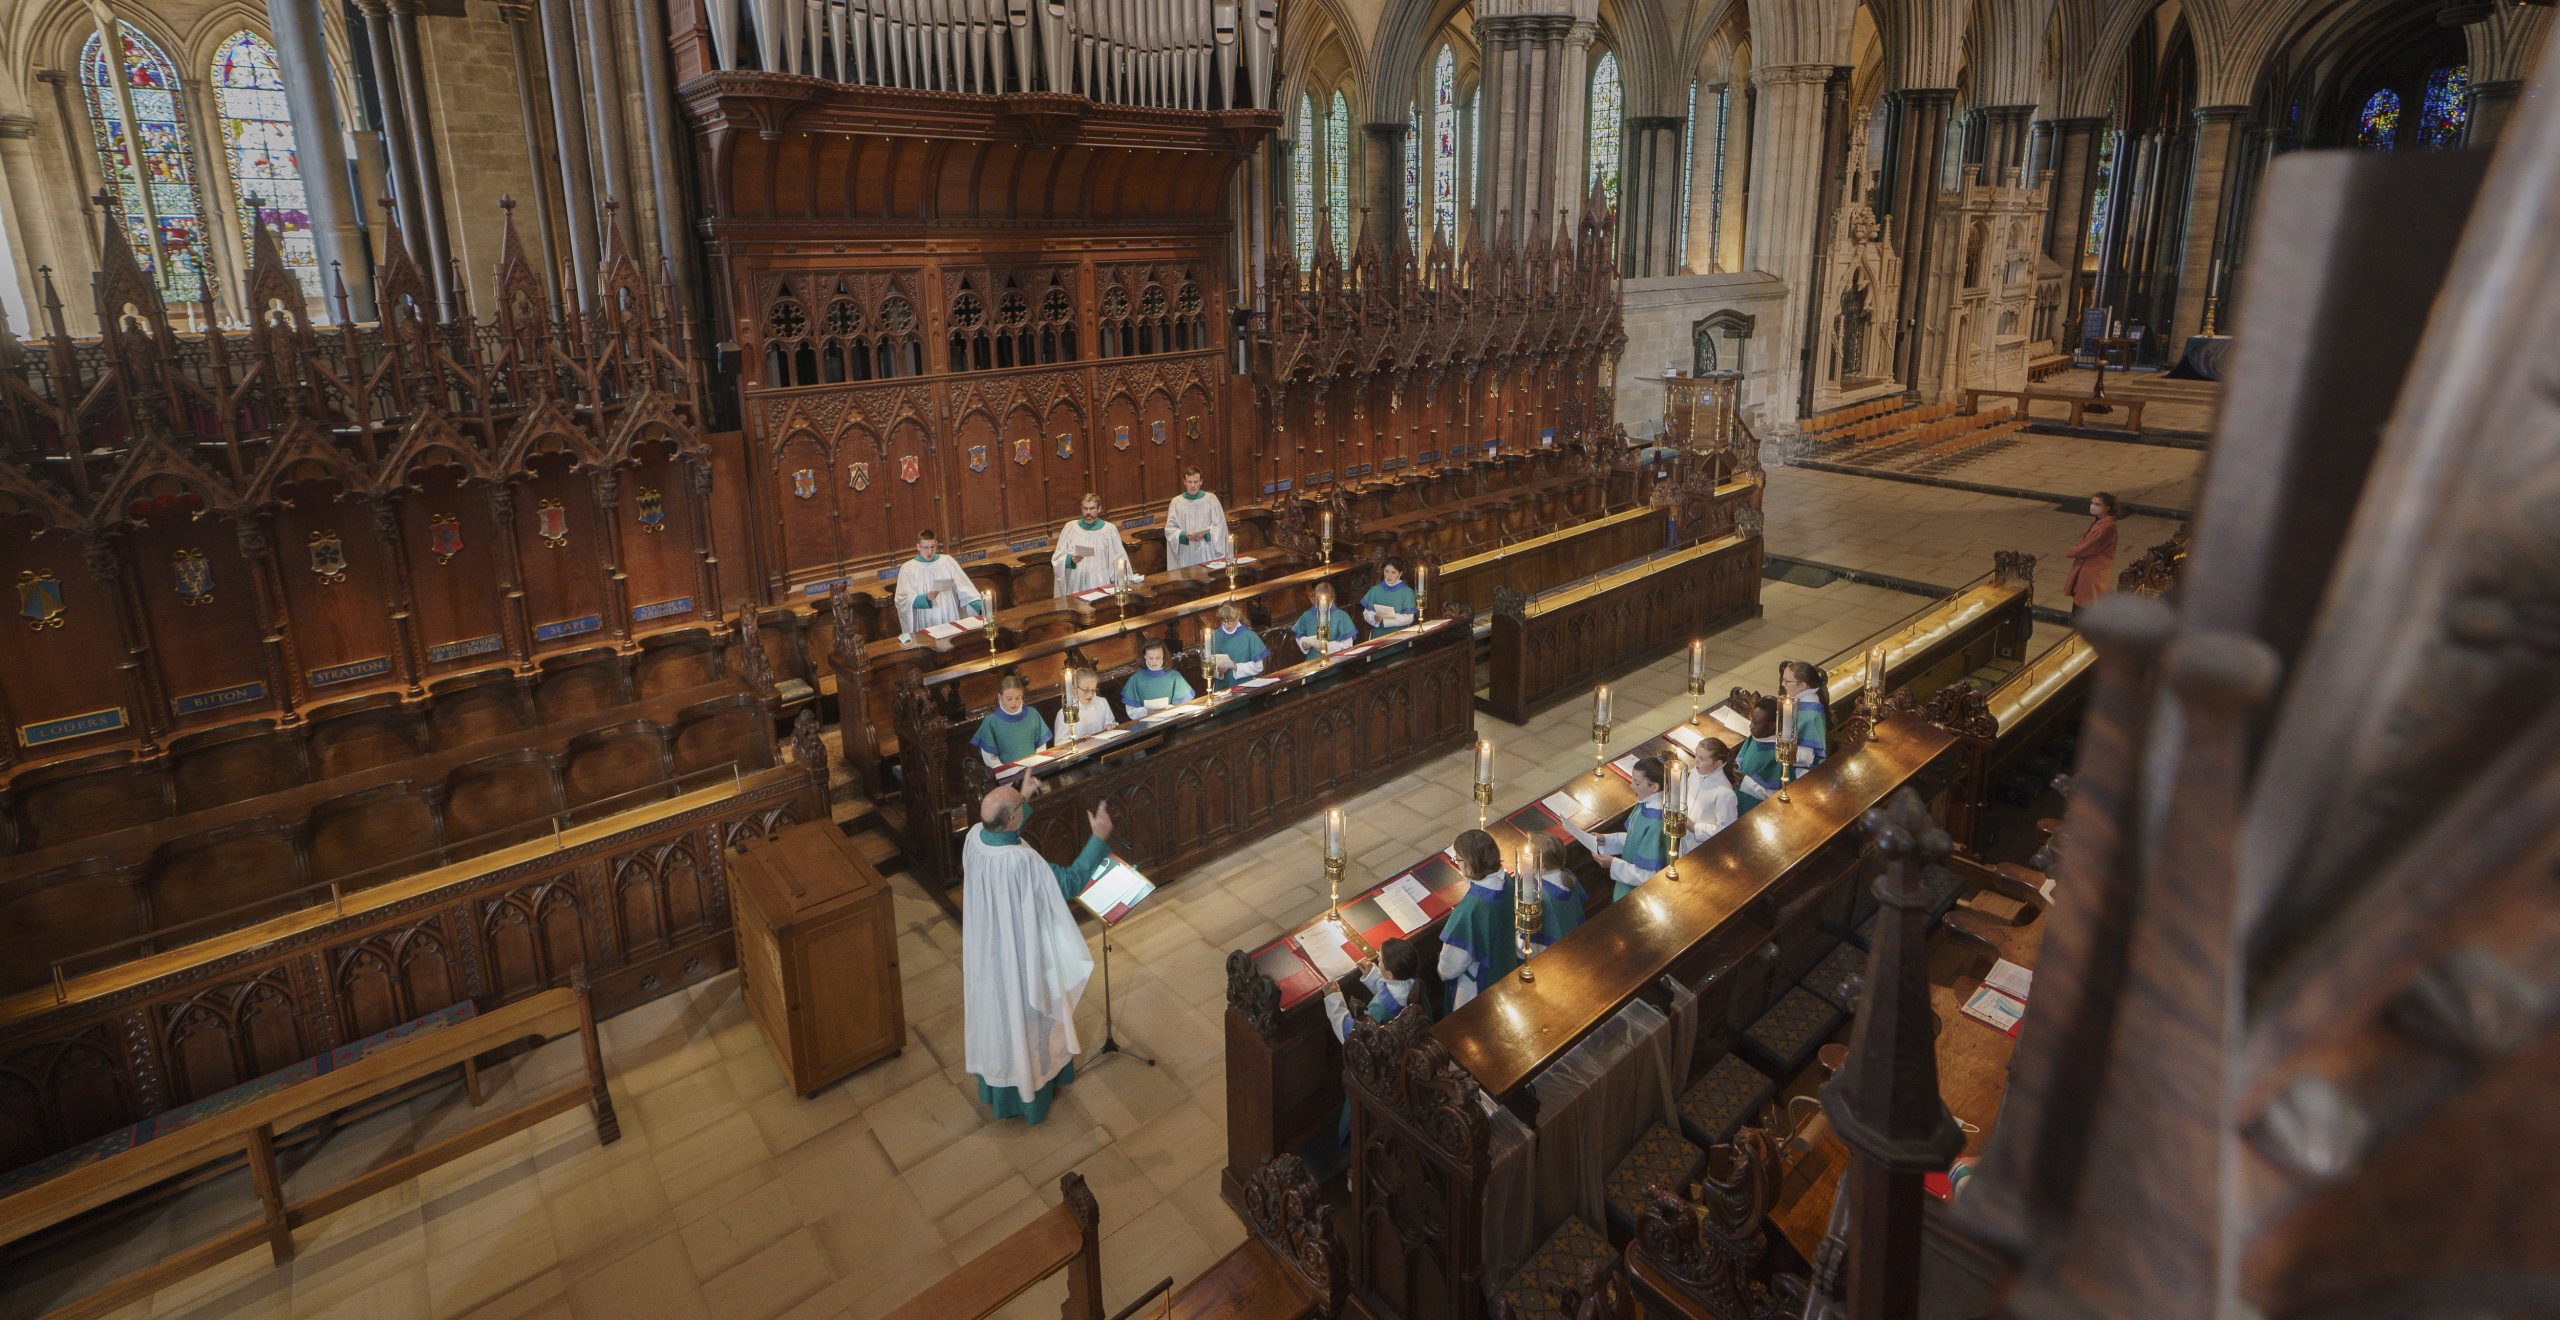 Girls from the Choir practising their music for Evensong worship.